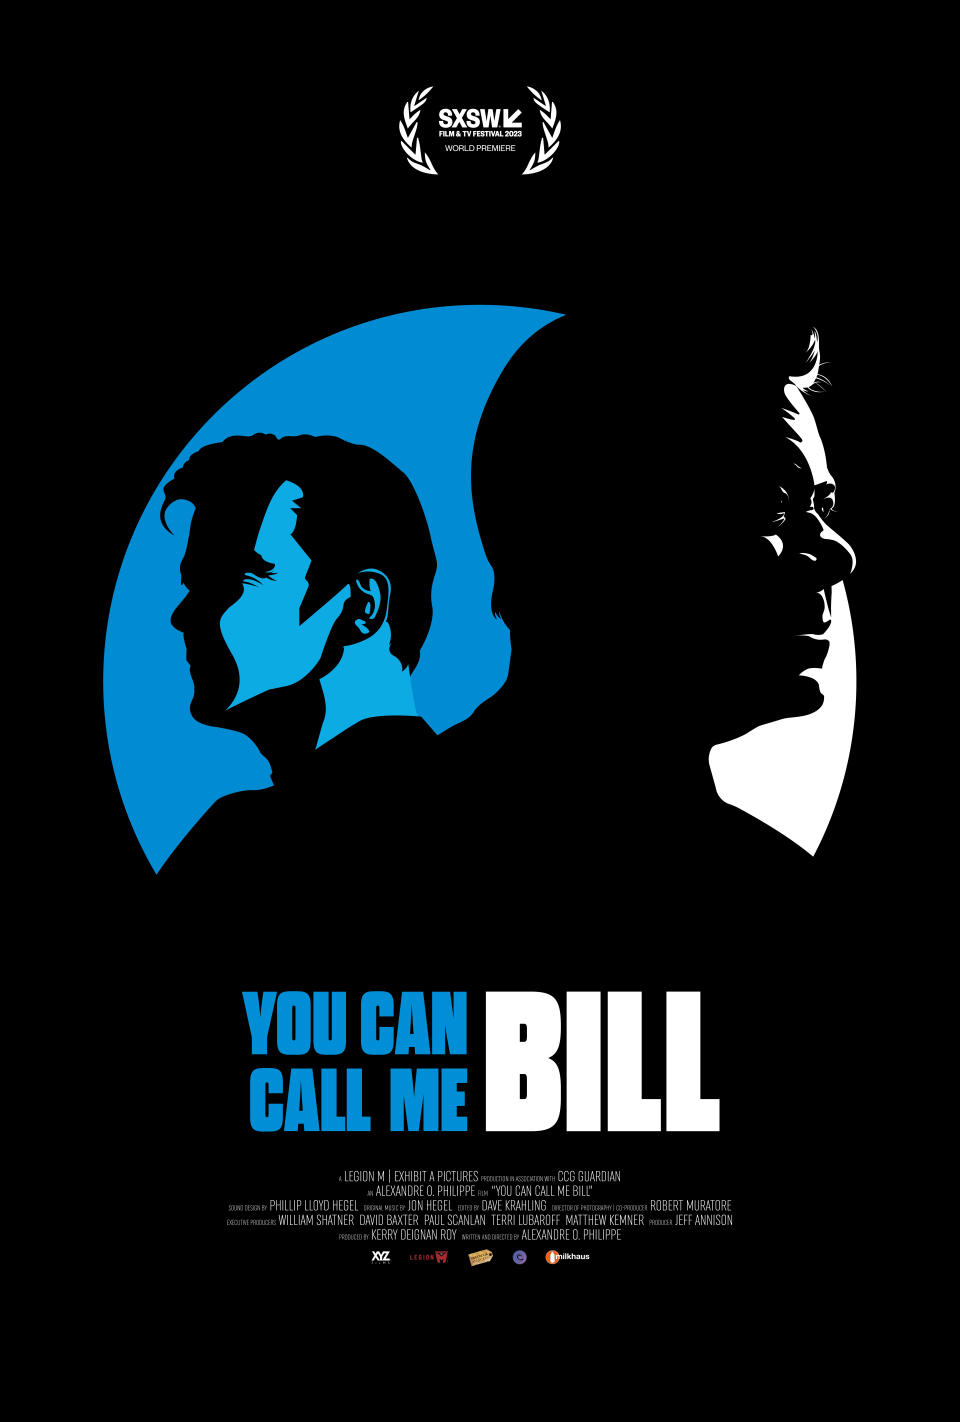 “You Can Call Me Bill” - Credit: Courtesy of Legion M